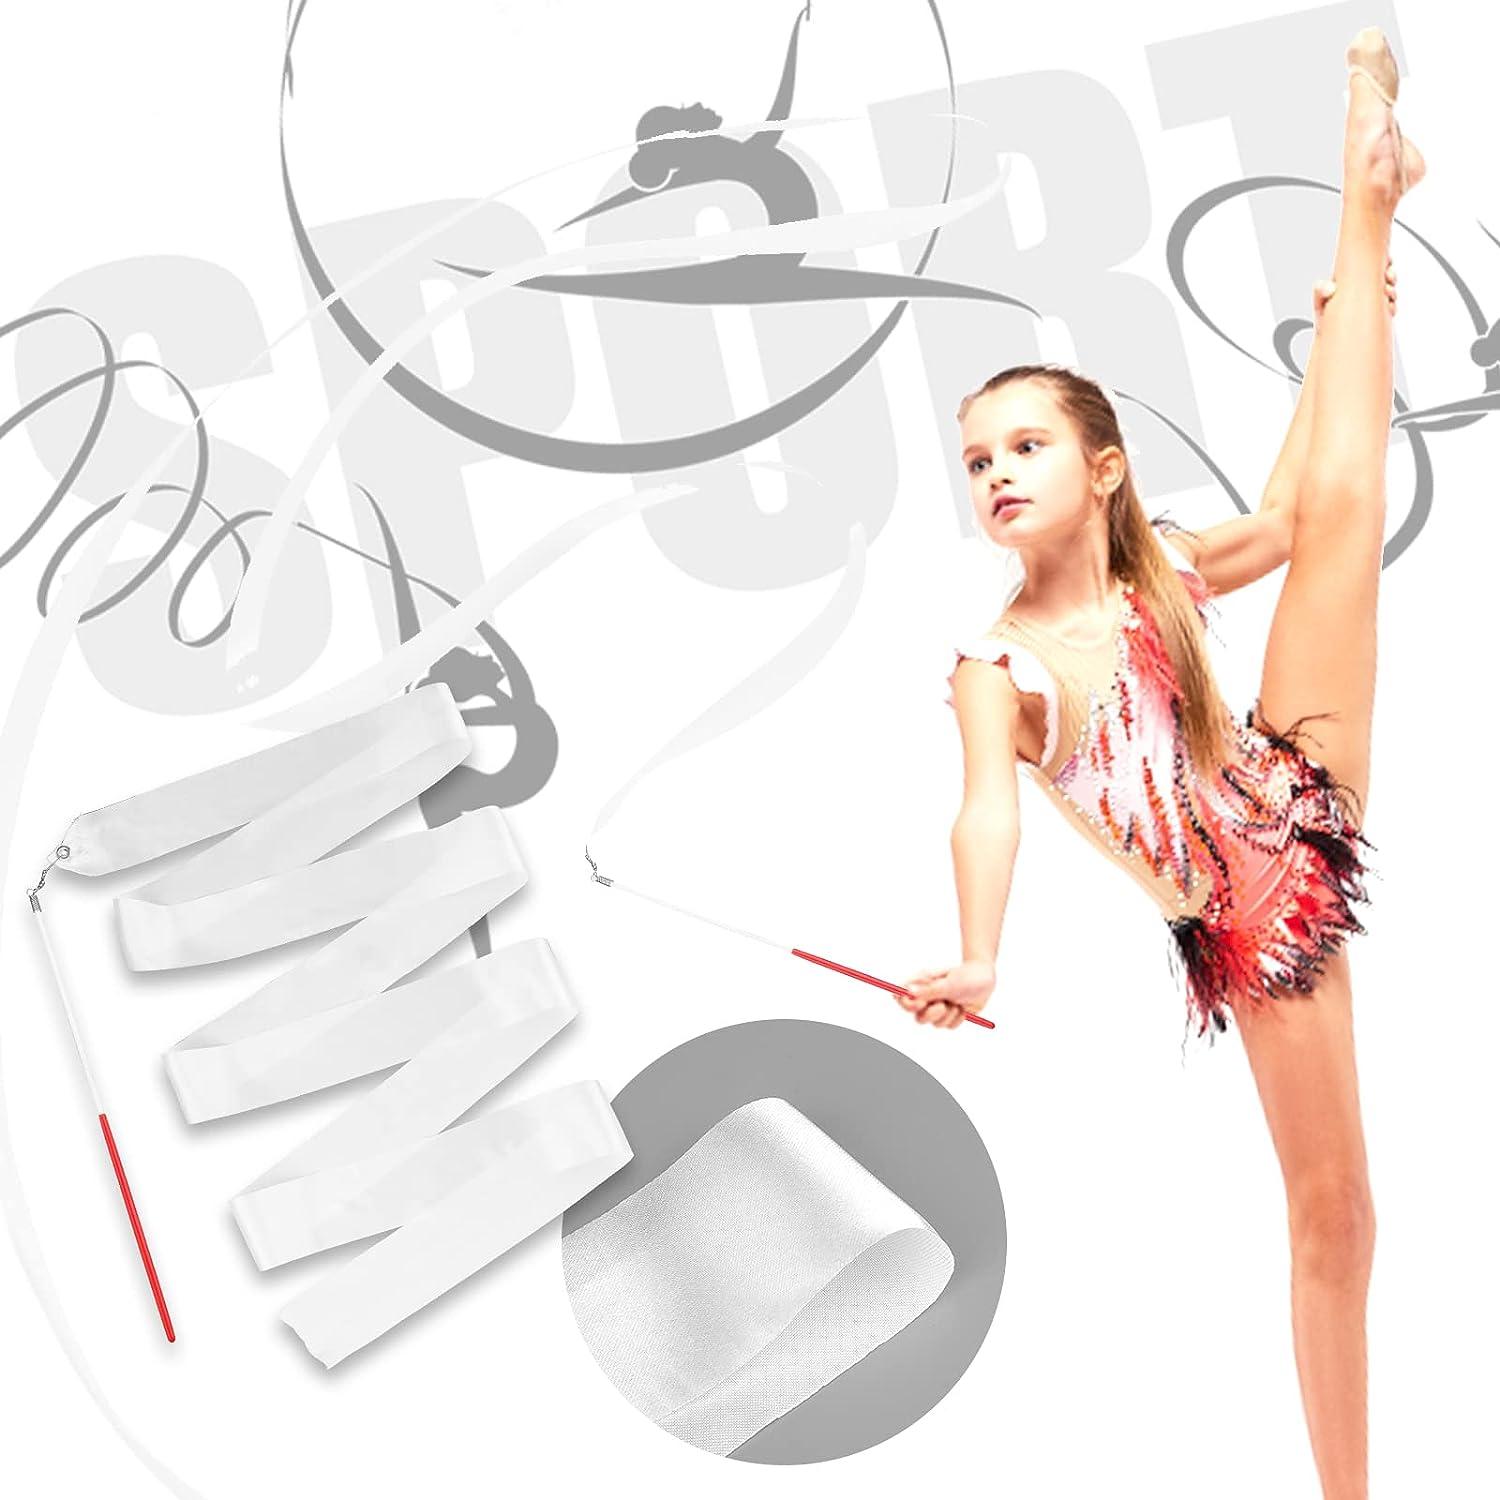 Grevosea Gymnastics Dance Ribbons, 4 Pieces Dancing Ribbon Streamers with  30cm Wand White Rhythmic Gymnastics Ribbon Gymnastics Equipment for Kids  Talent Shows Artistic Dancing (78.74inch)